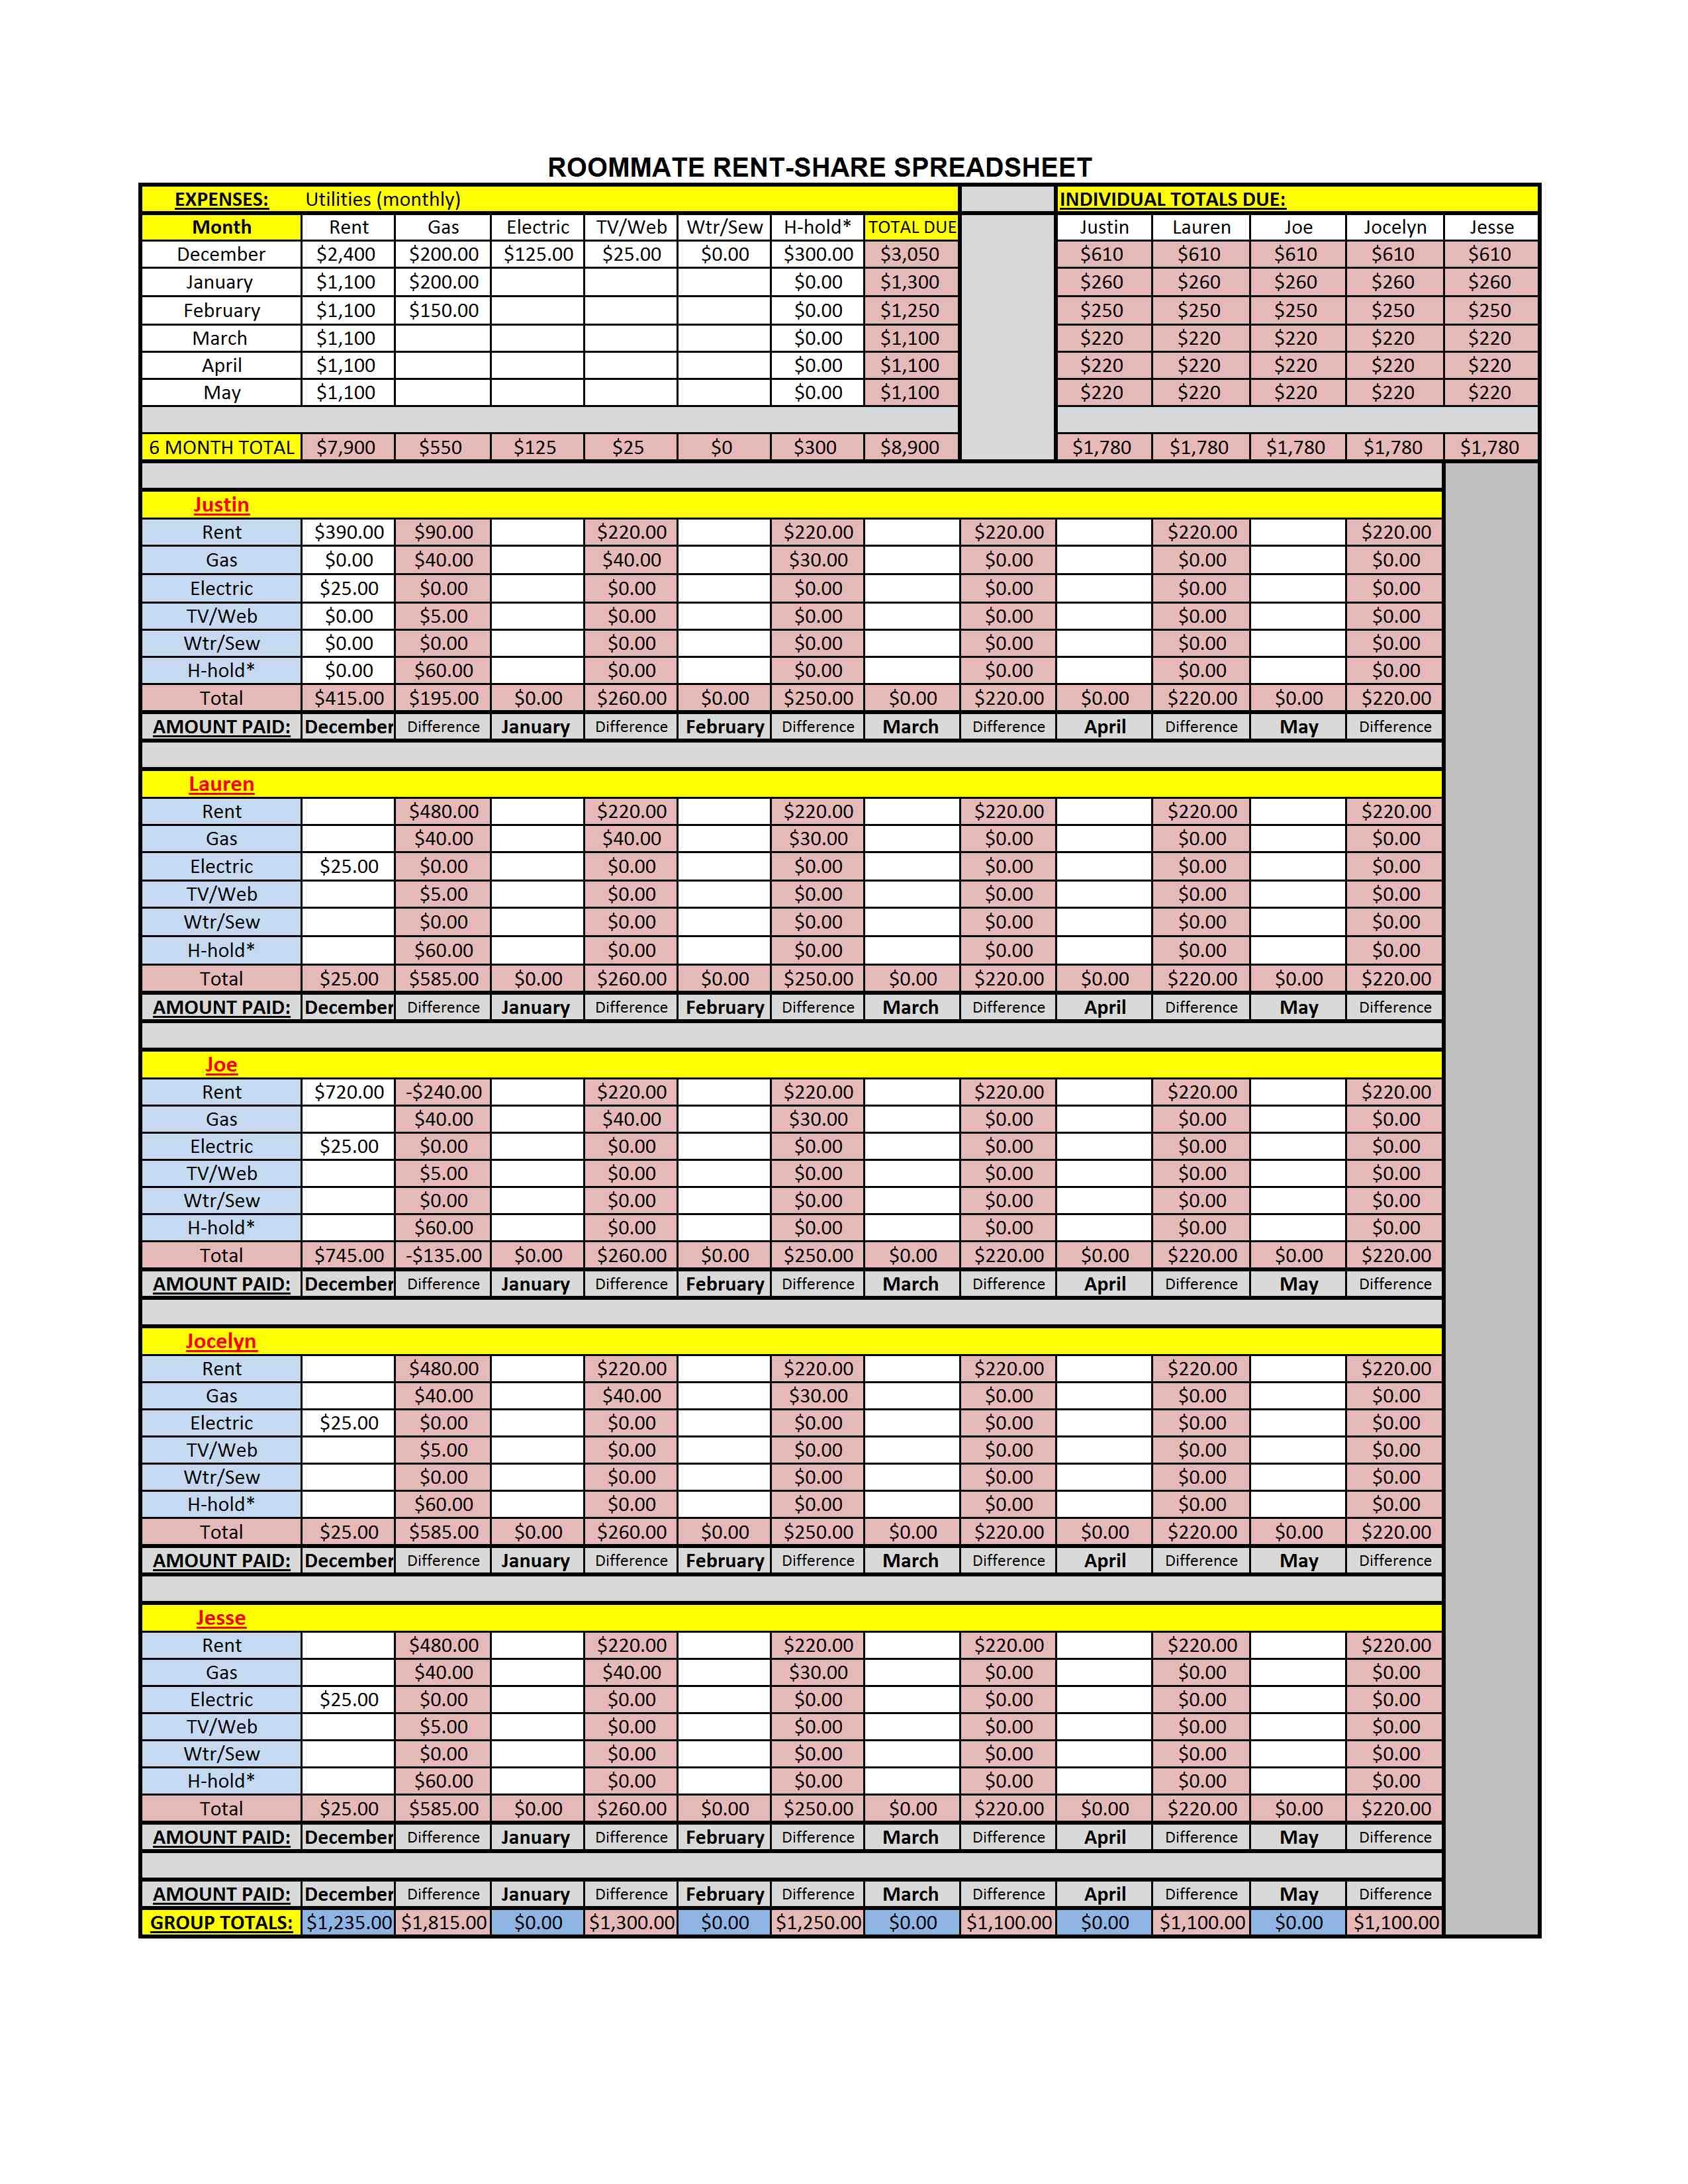 Roommate Expense Spreadsheet On Budget Excel Workout Document Sheet For